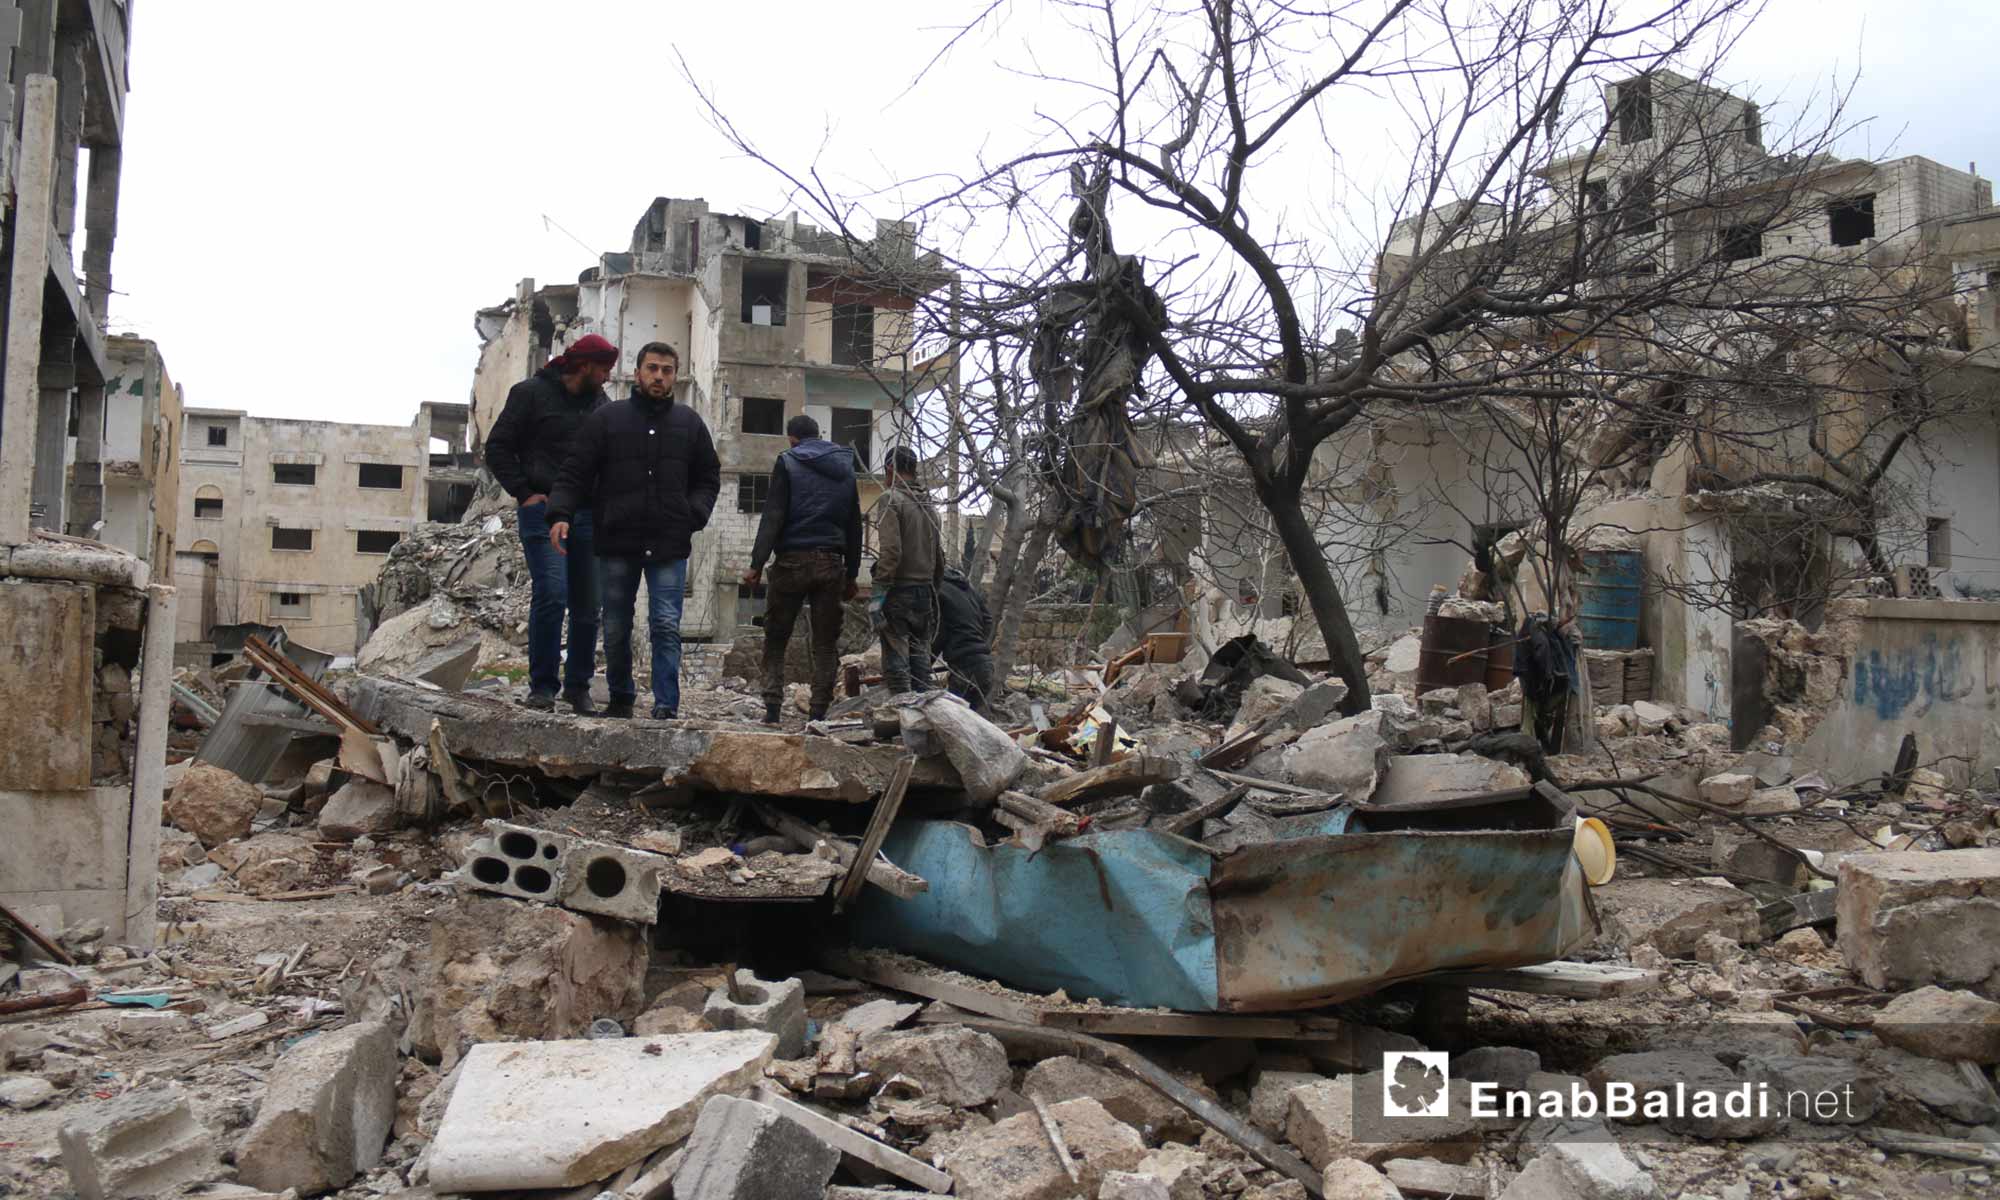 The effects of the Russian shelling of residential neighborhoods in the center of Idlib city – March 14, 2019 (Enab Baladi)